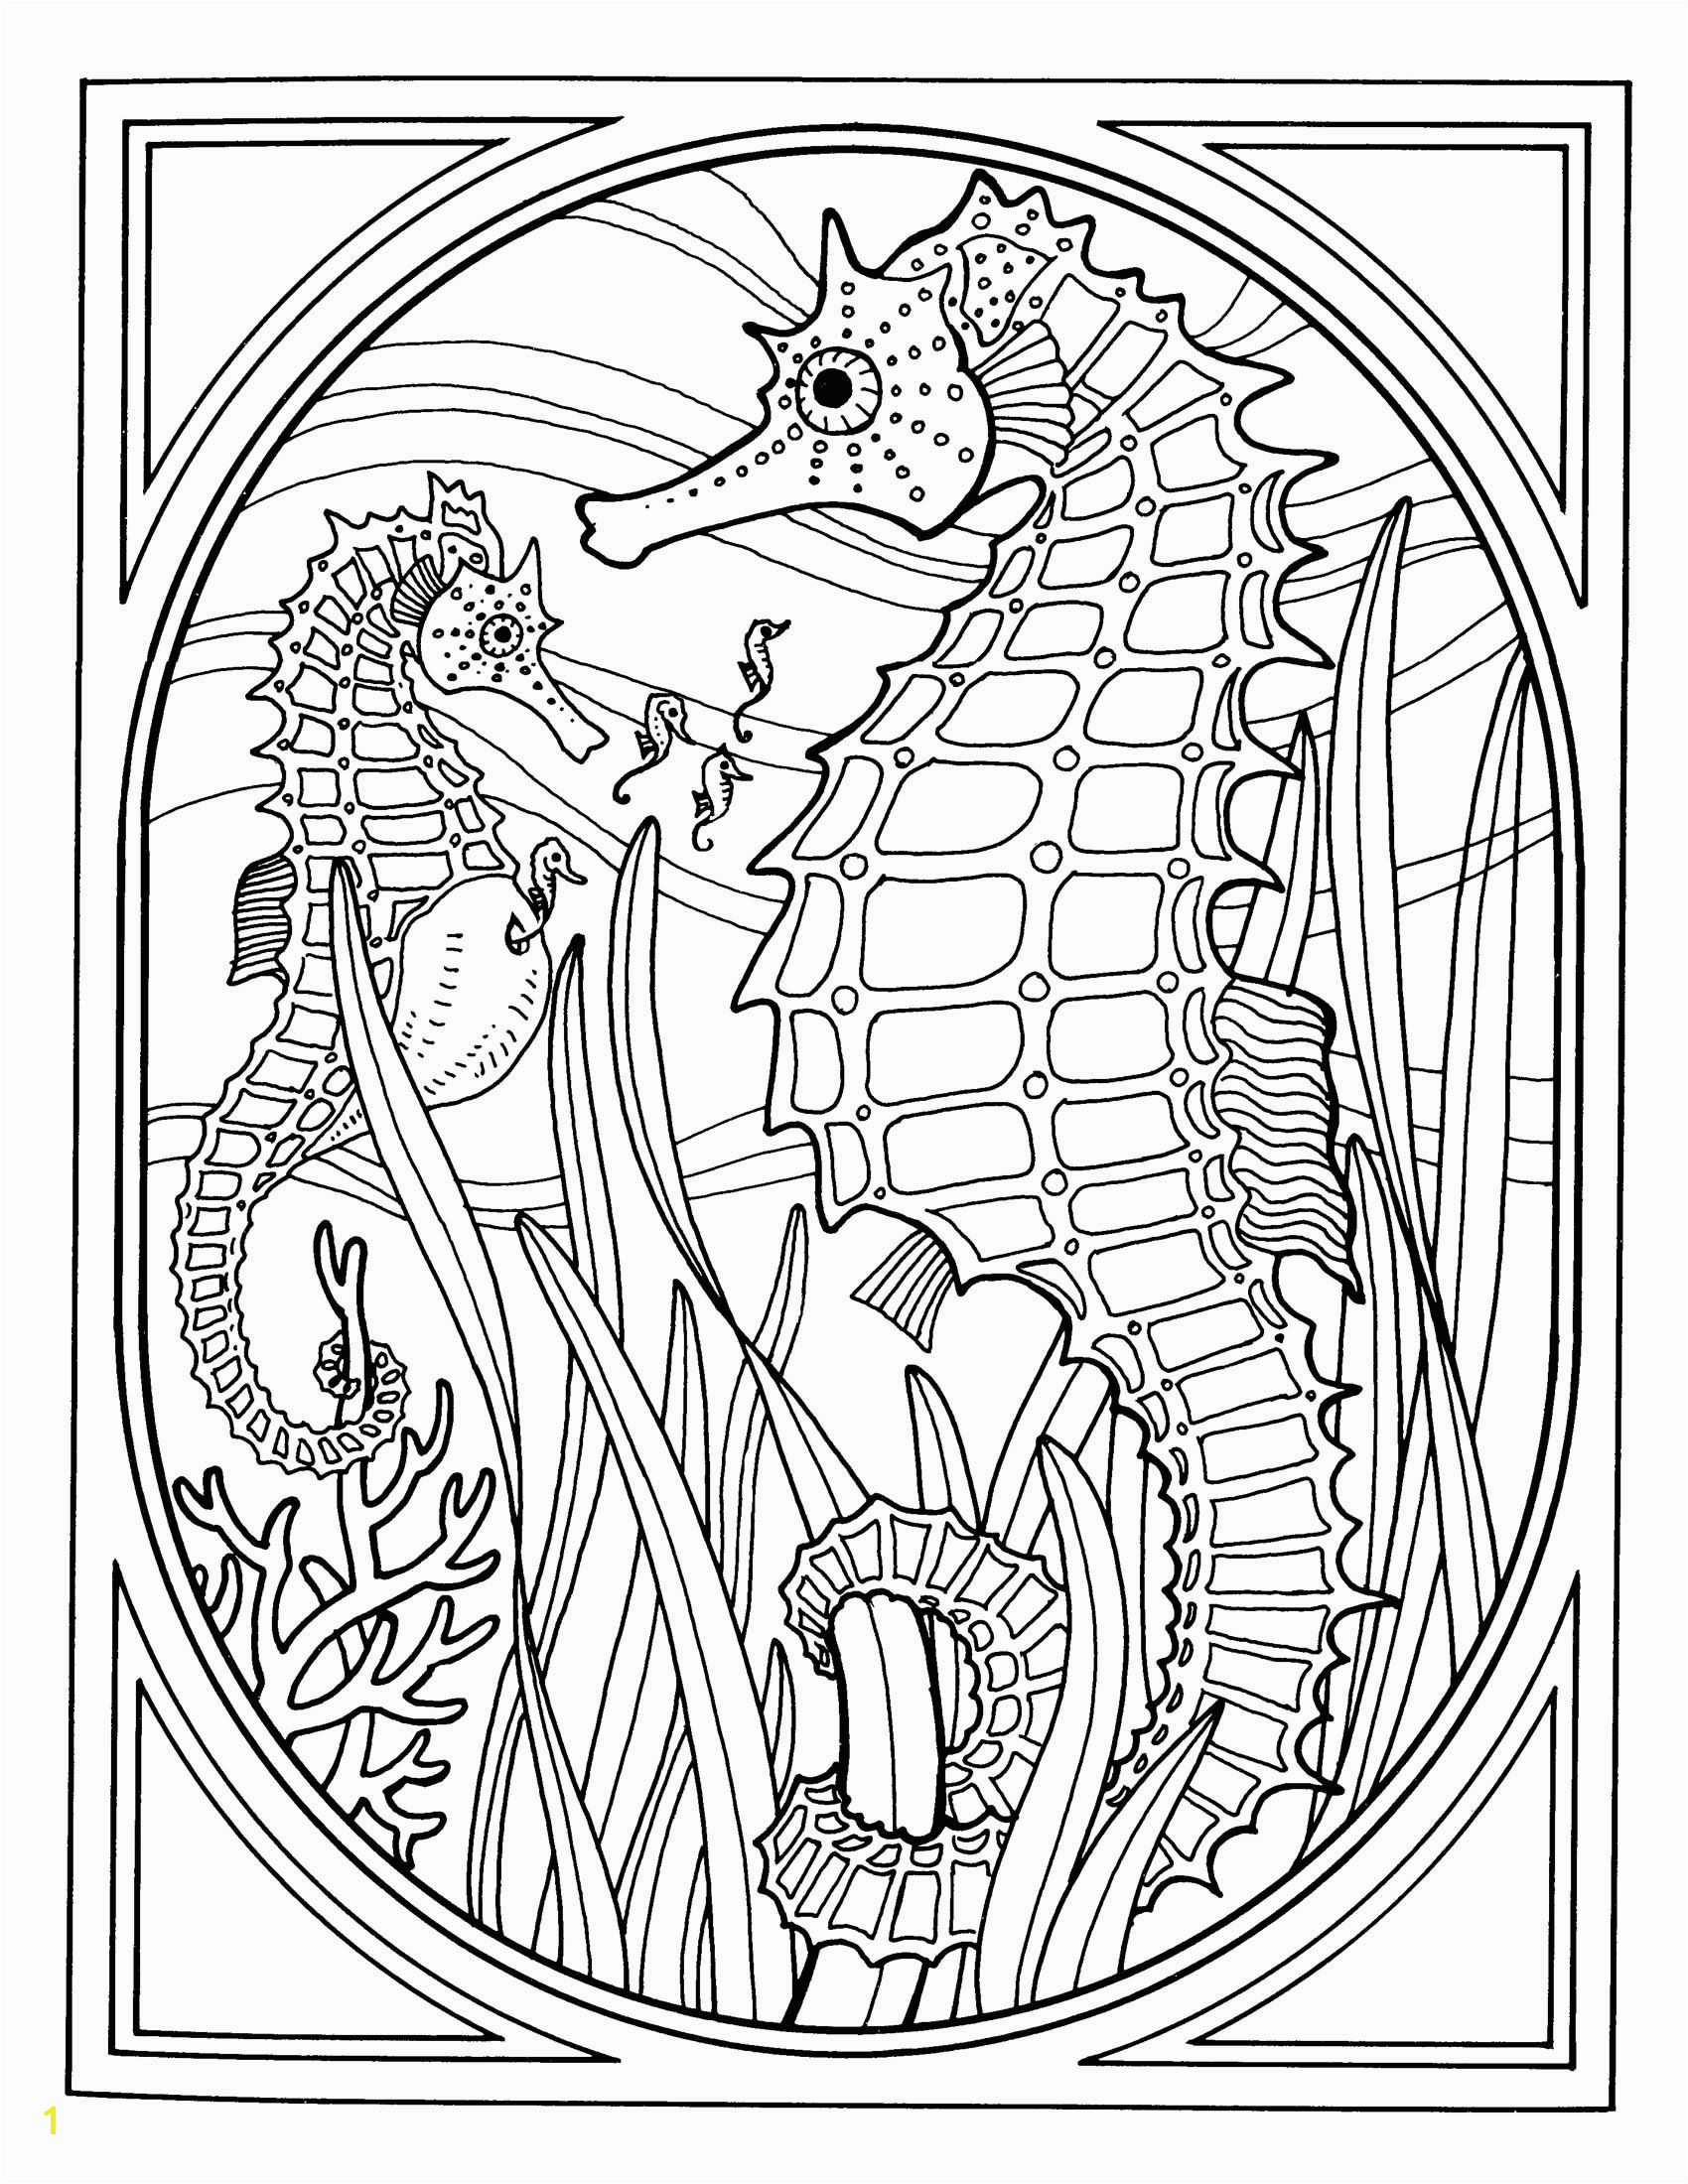 Alligator Gar Coloring Page Intricate Coloring Pages